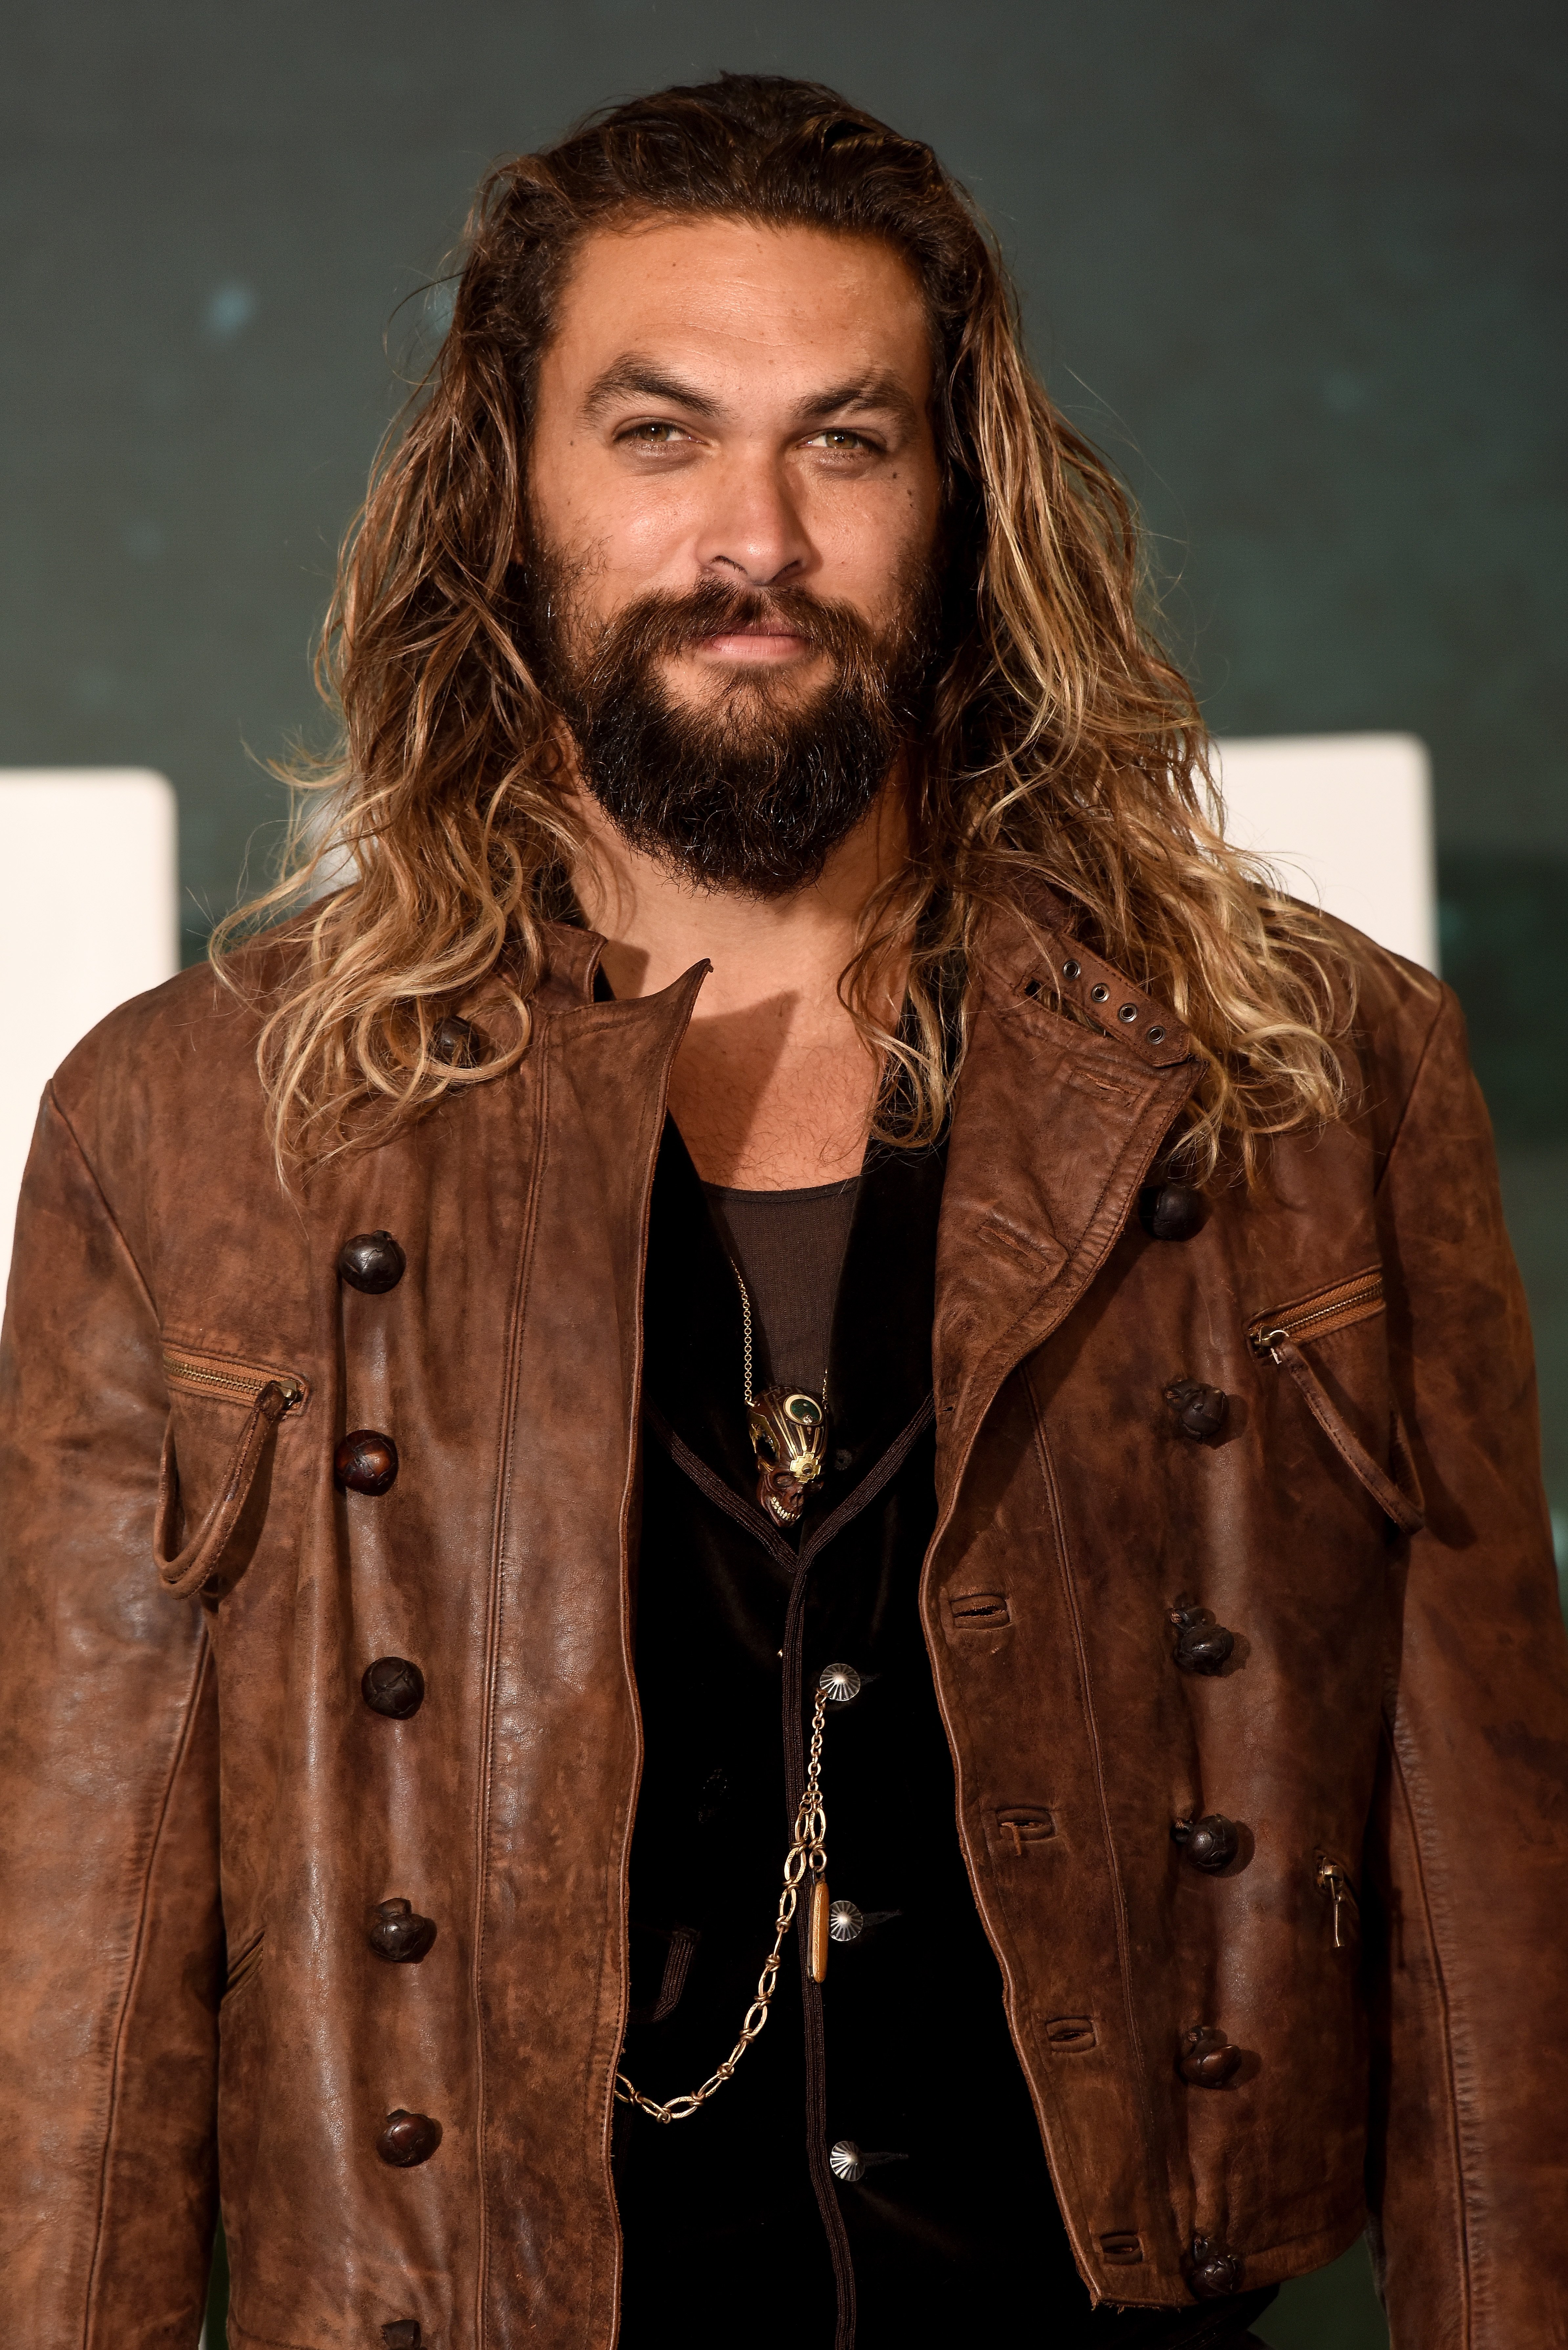 Jason Momoa attends the 'Justice League' photocall at The College on November 4, 2017 in London, England | Photo: Getty Images